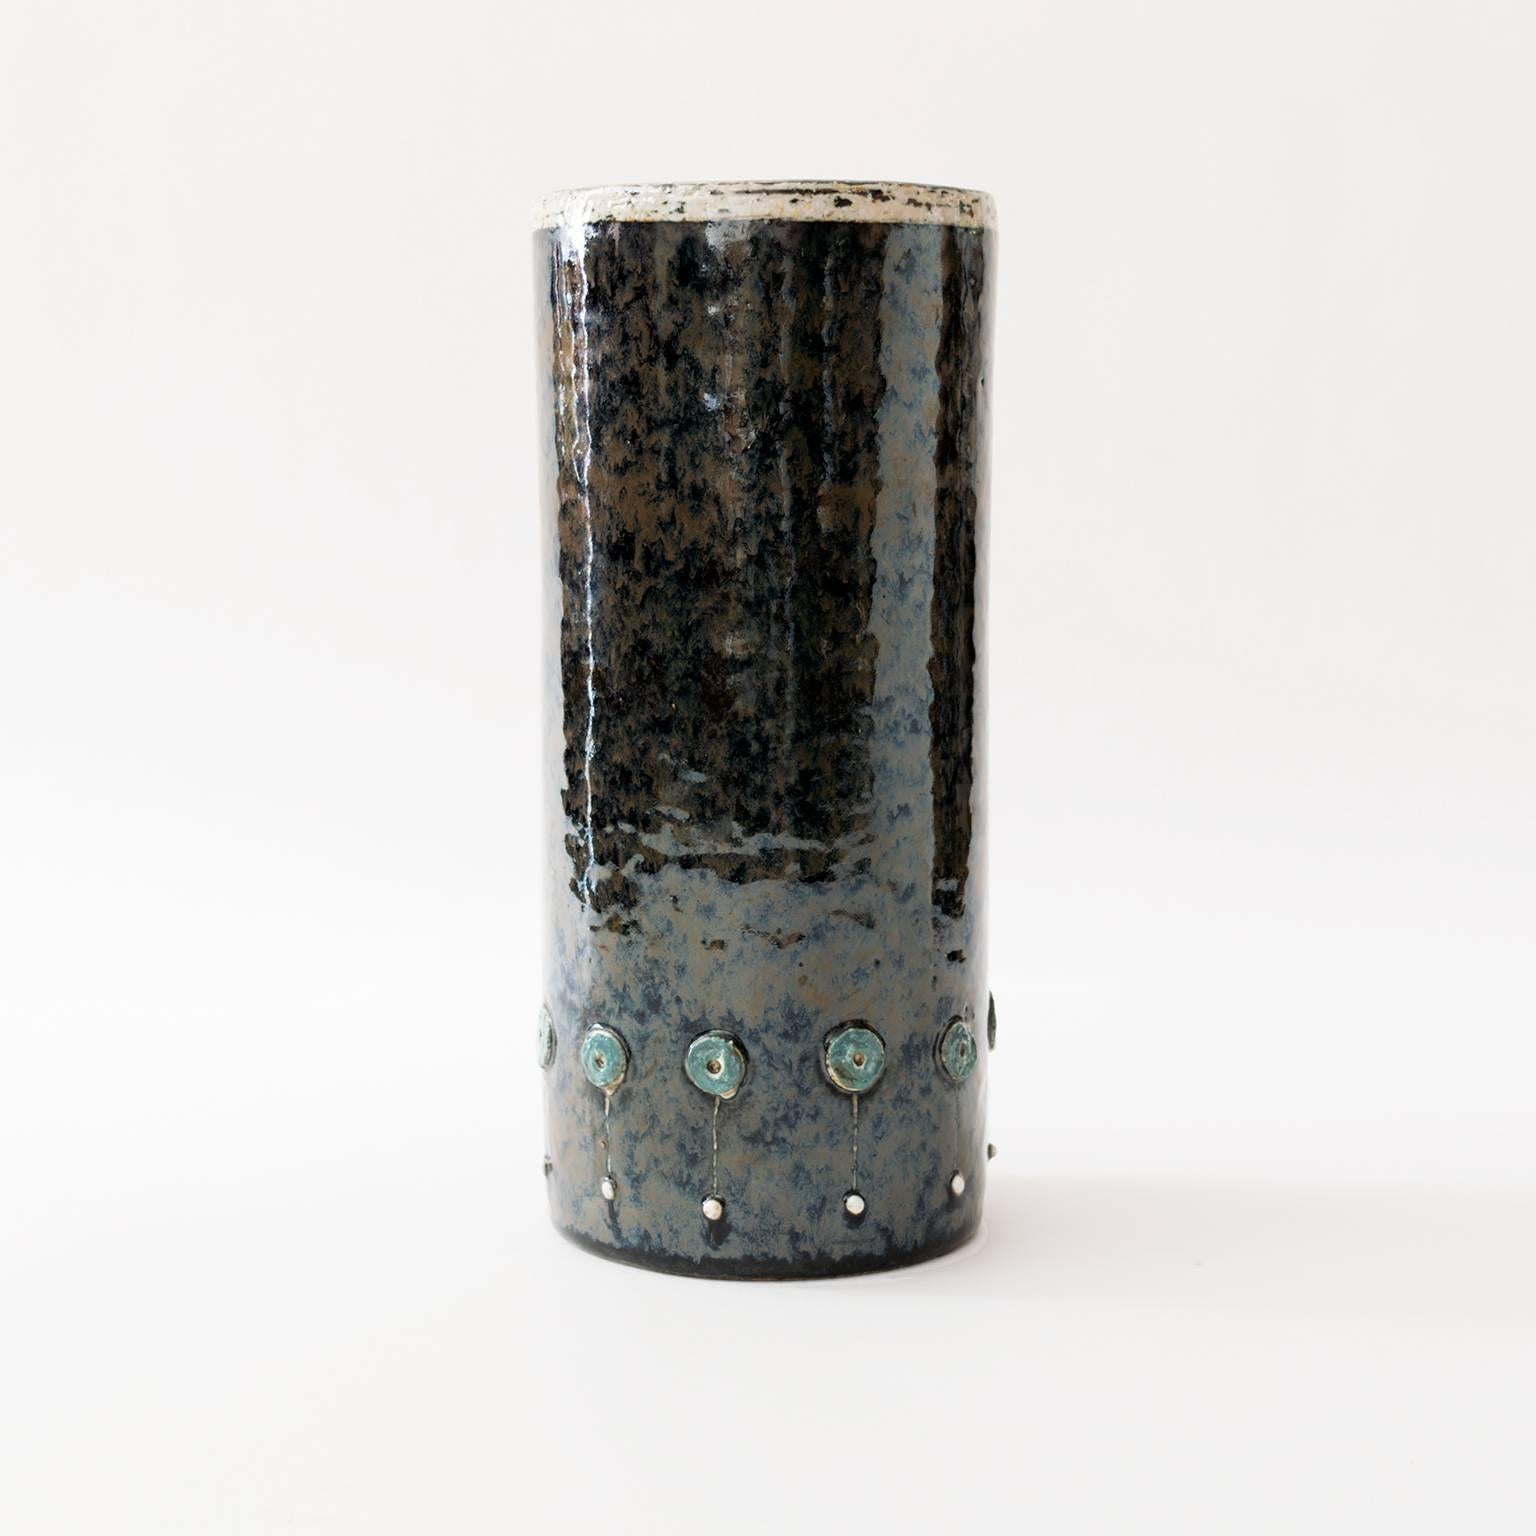 A tall Scandinavian modern Mid-Century ceramic studio vase with raised elements and finished in a dark glaze by designer Sylvia Leuchovius for Rorstrand, Sweden.
 
Measures: H 10", D 4.5".